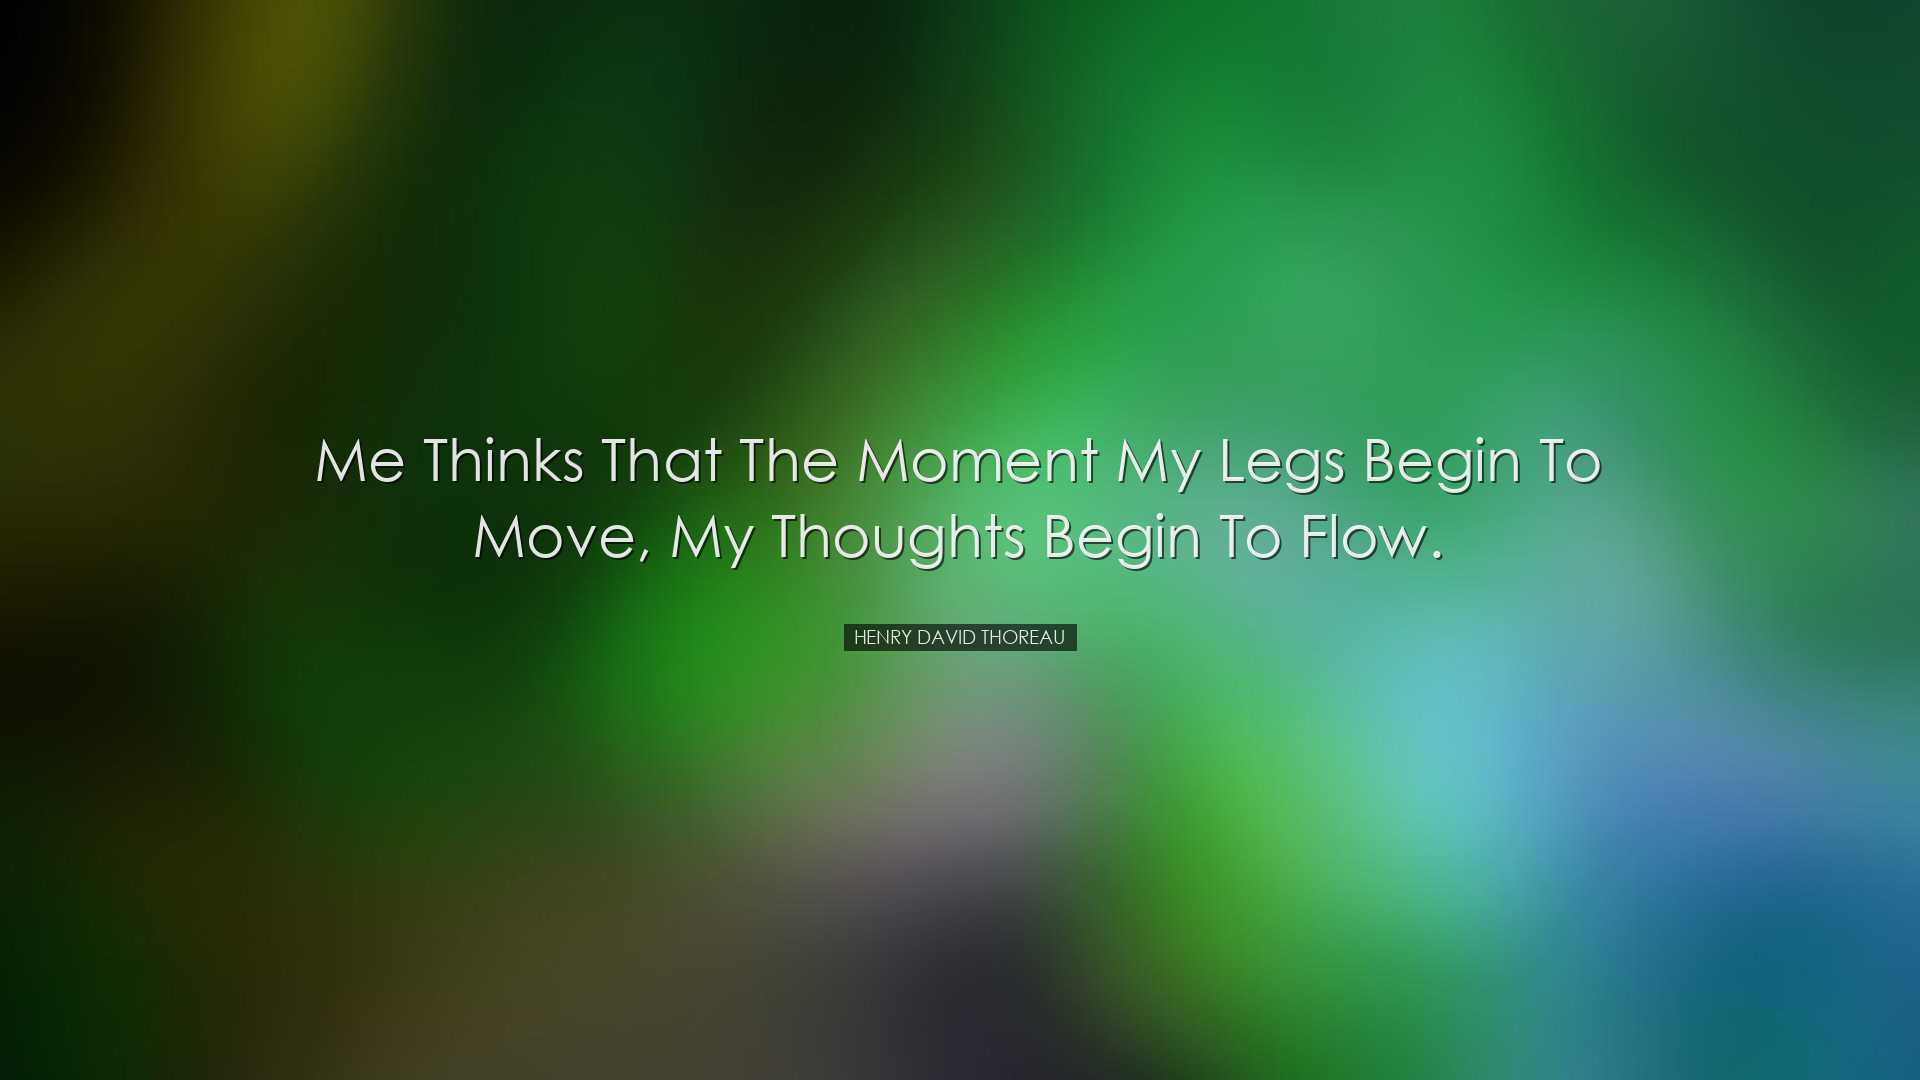 Me thinks that the moment my legs begin to move, my thoughts begin